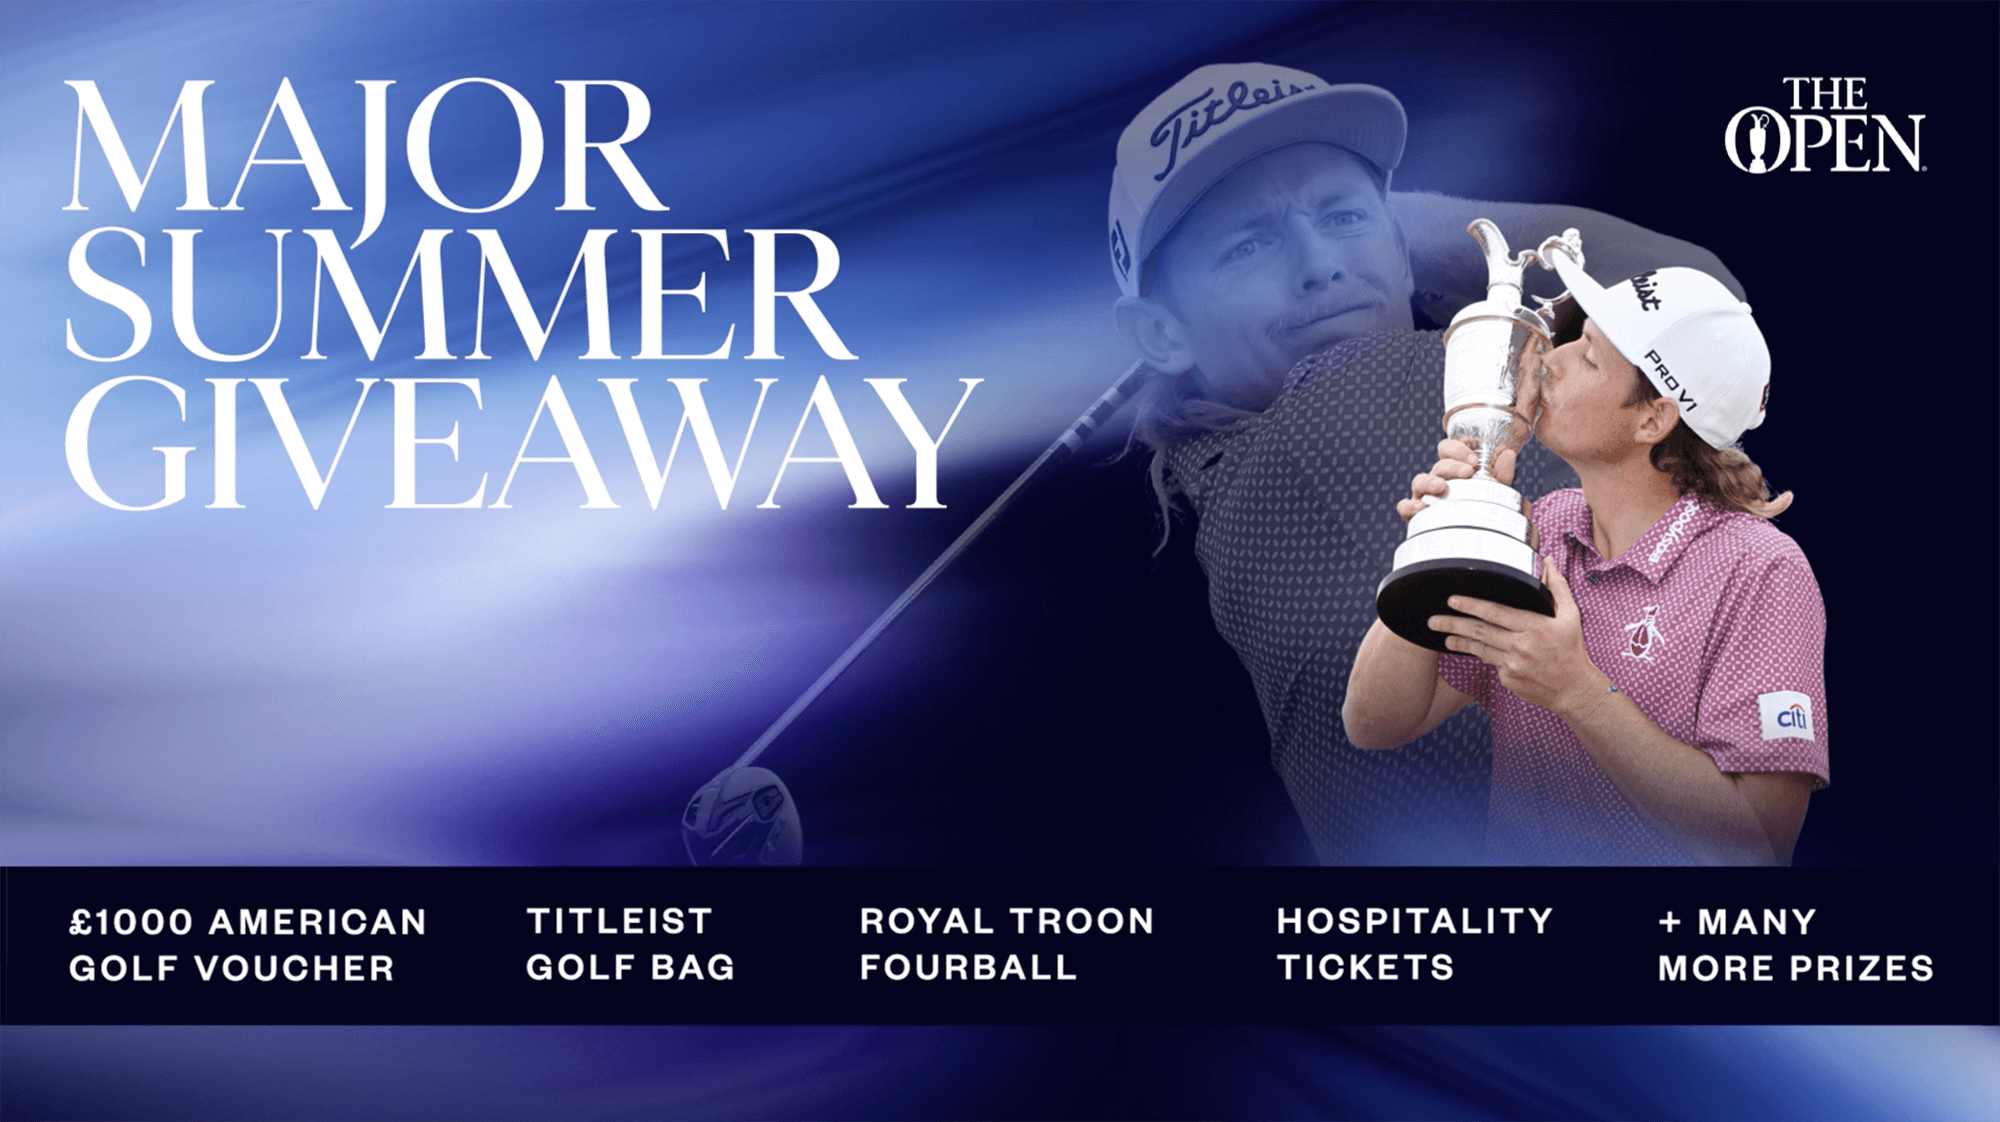 The Open's Major Summer Giveaway